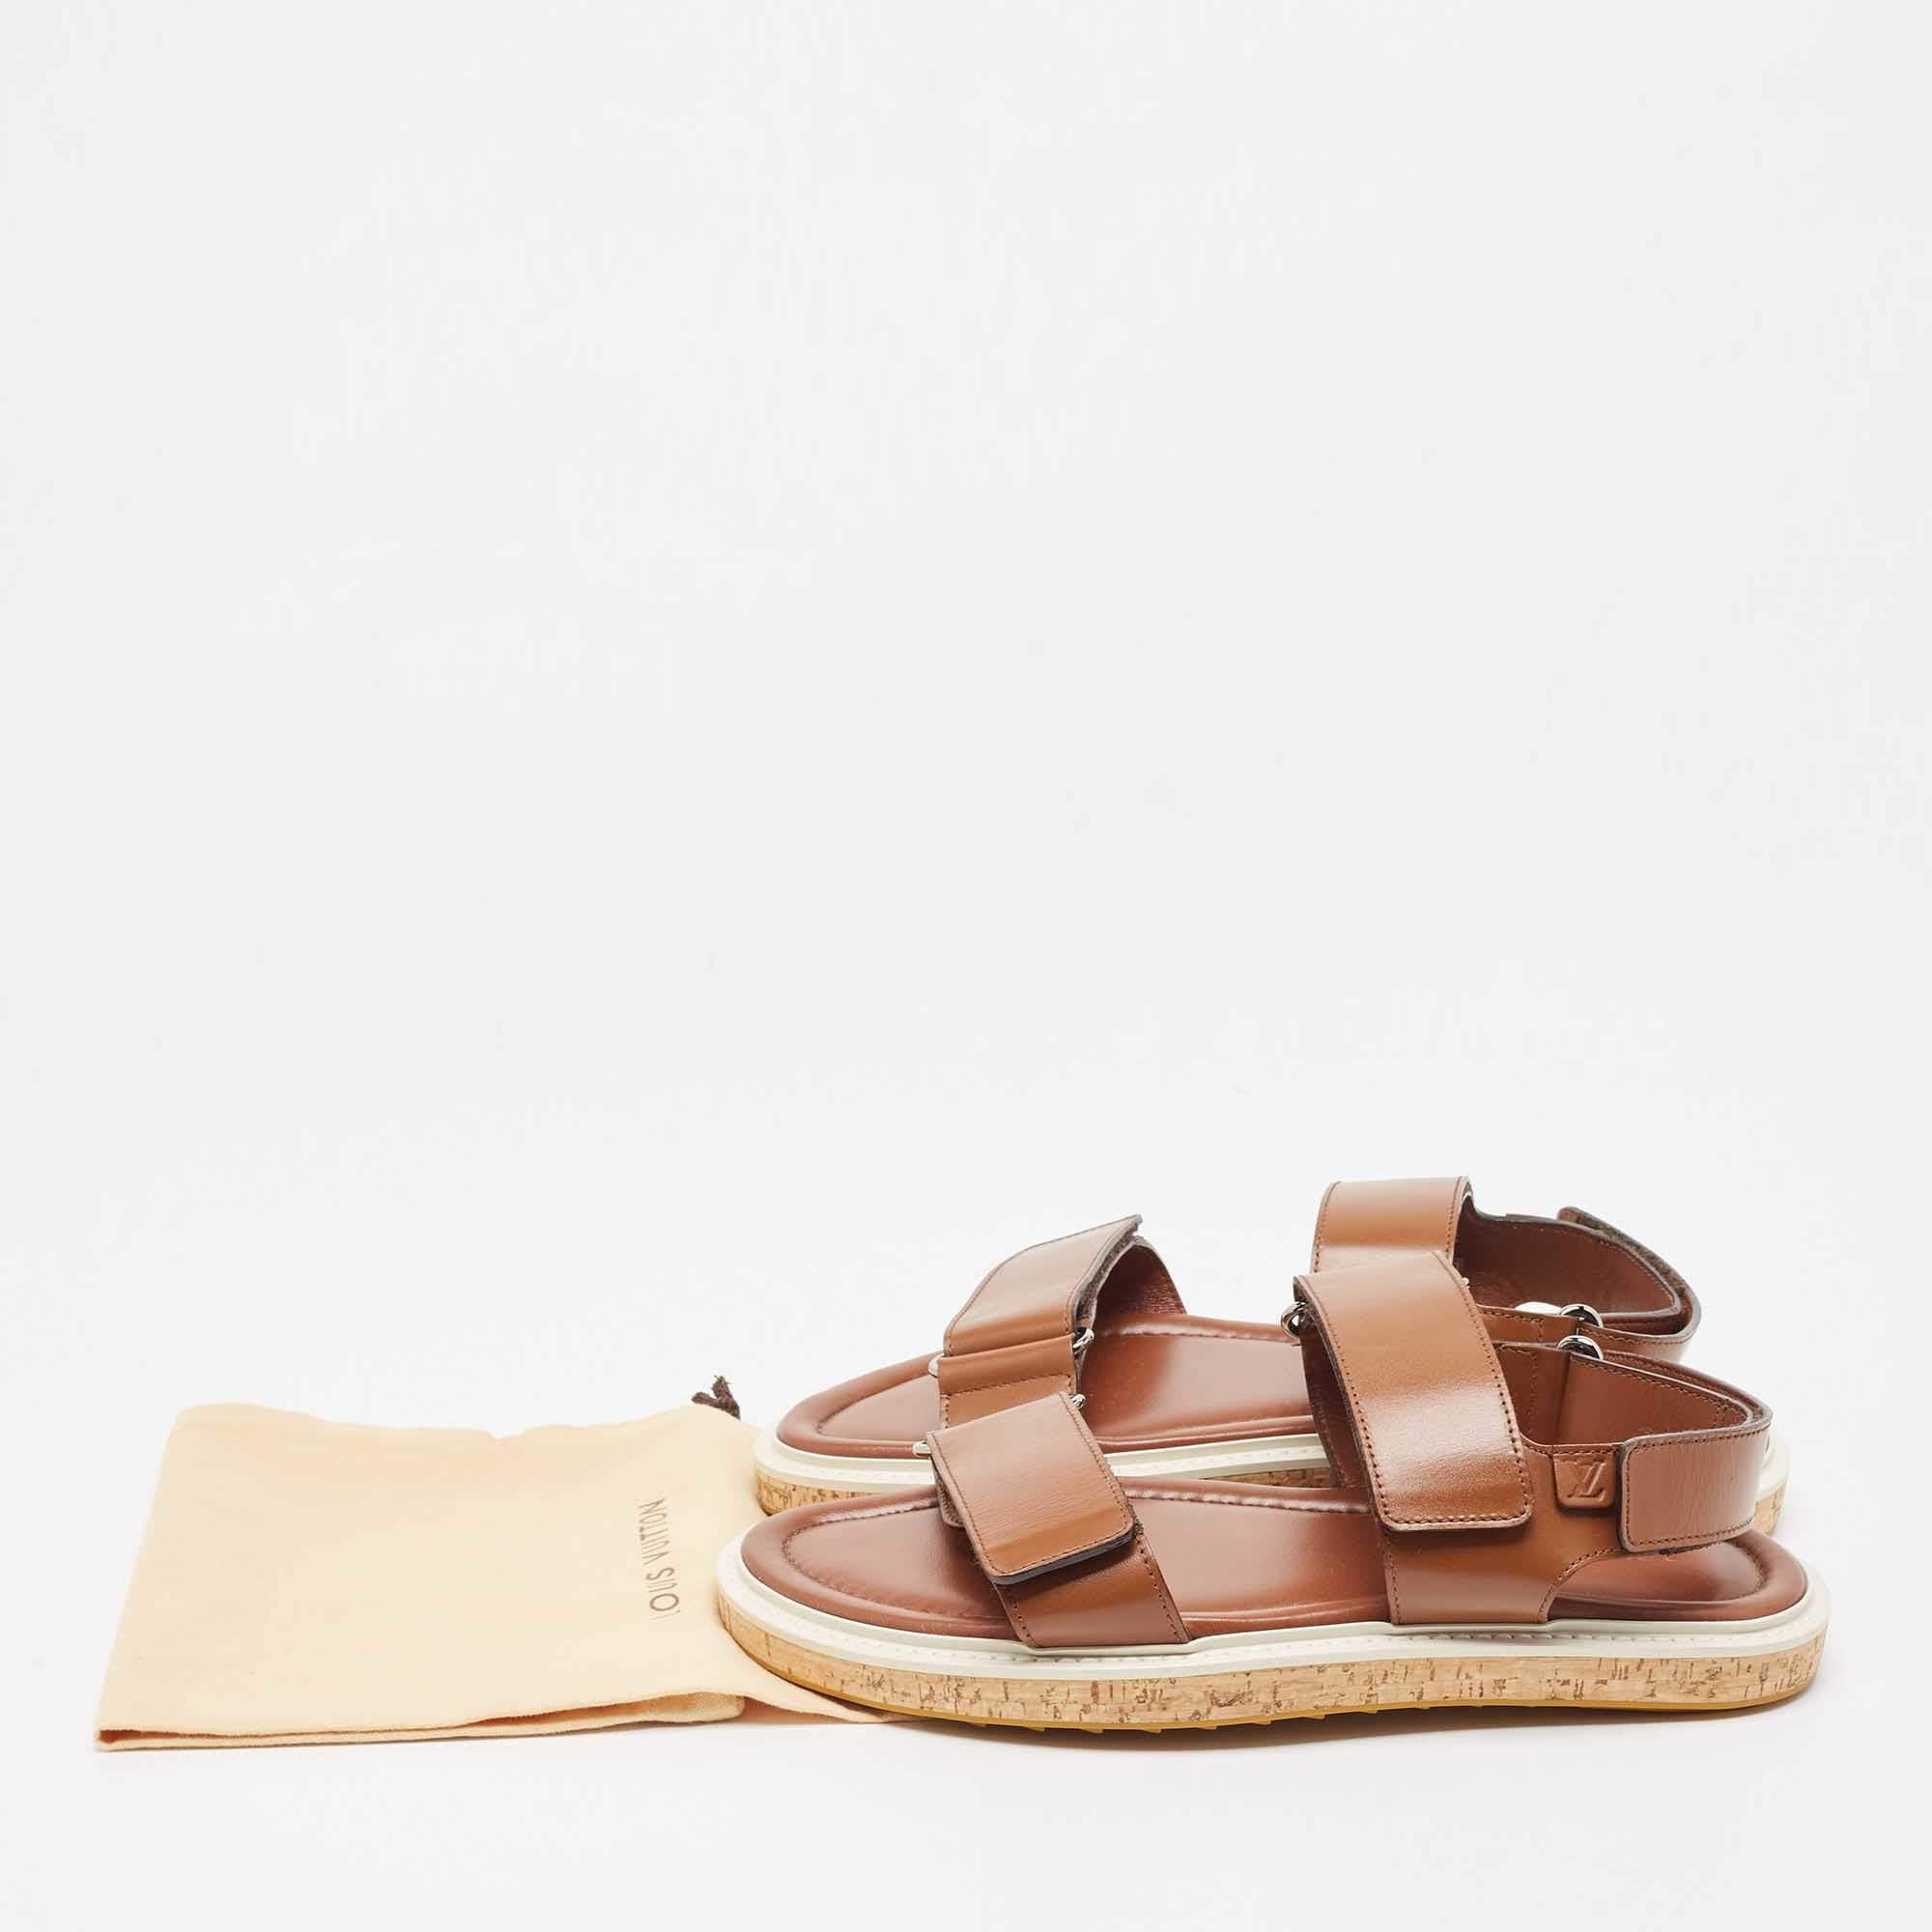 Louis Vuitton Brown Leather Sandals Size 42.5 For Sale 5